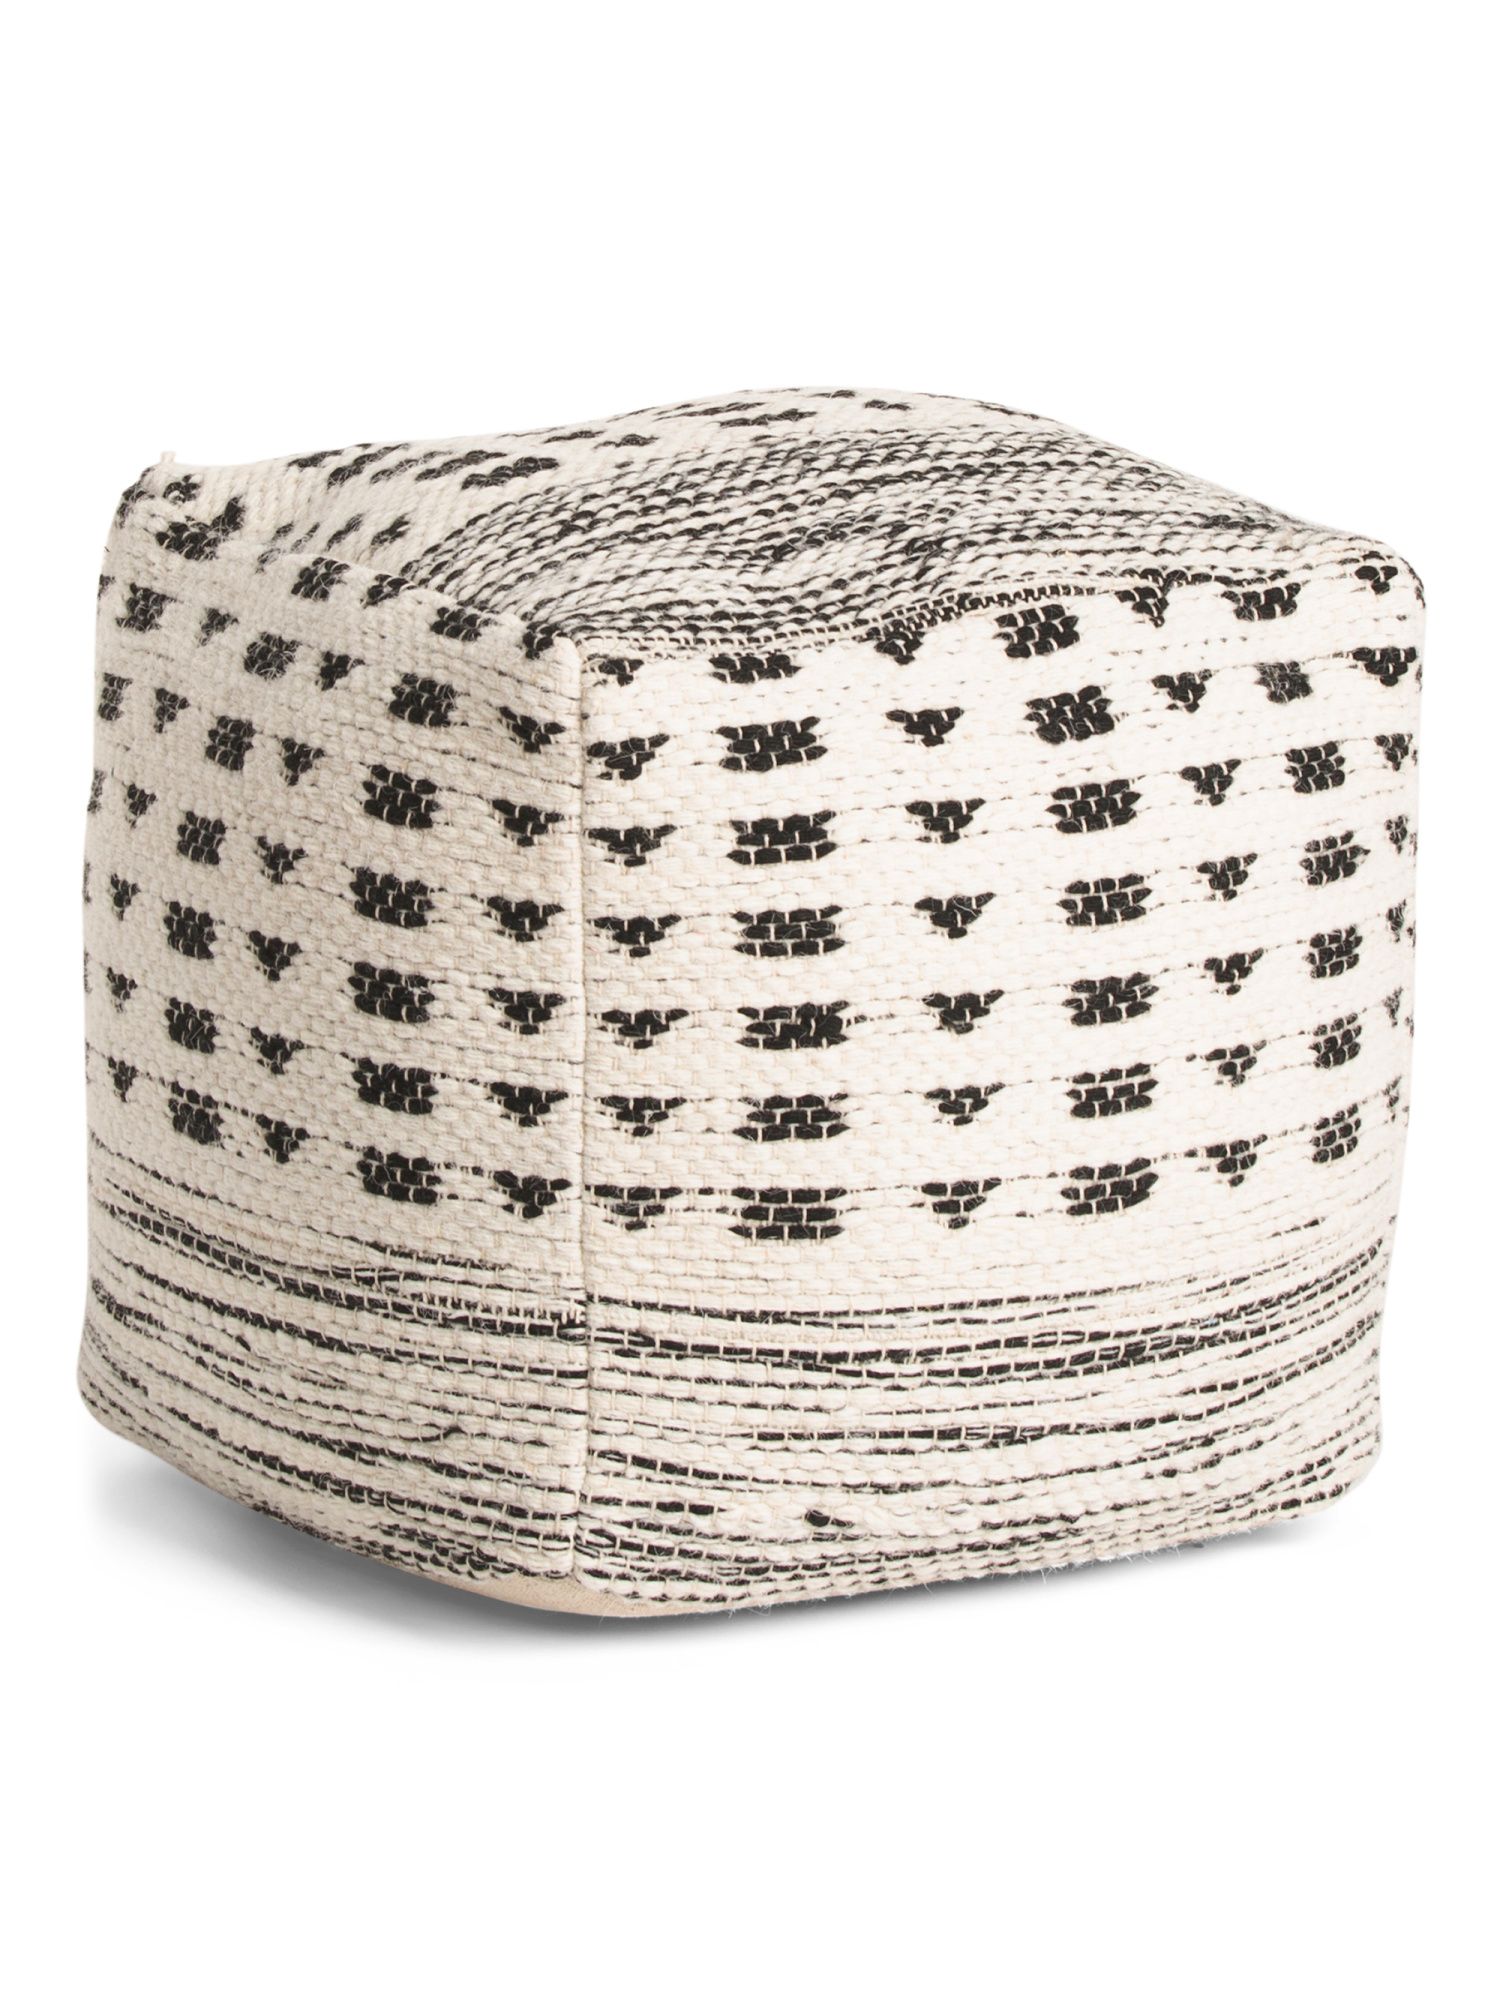 Made In India 16x16 Woven Wool Blend Pouf | TJ Maxx